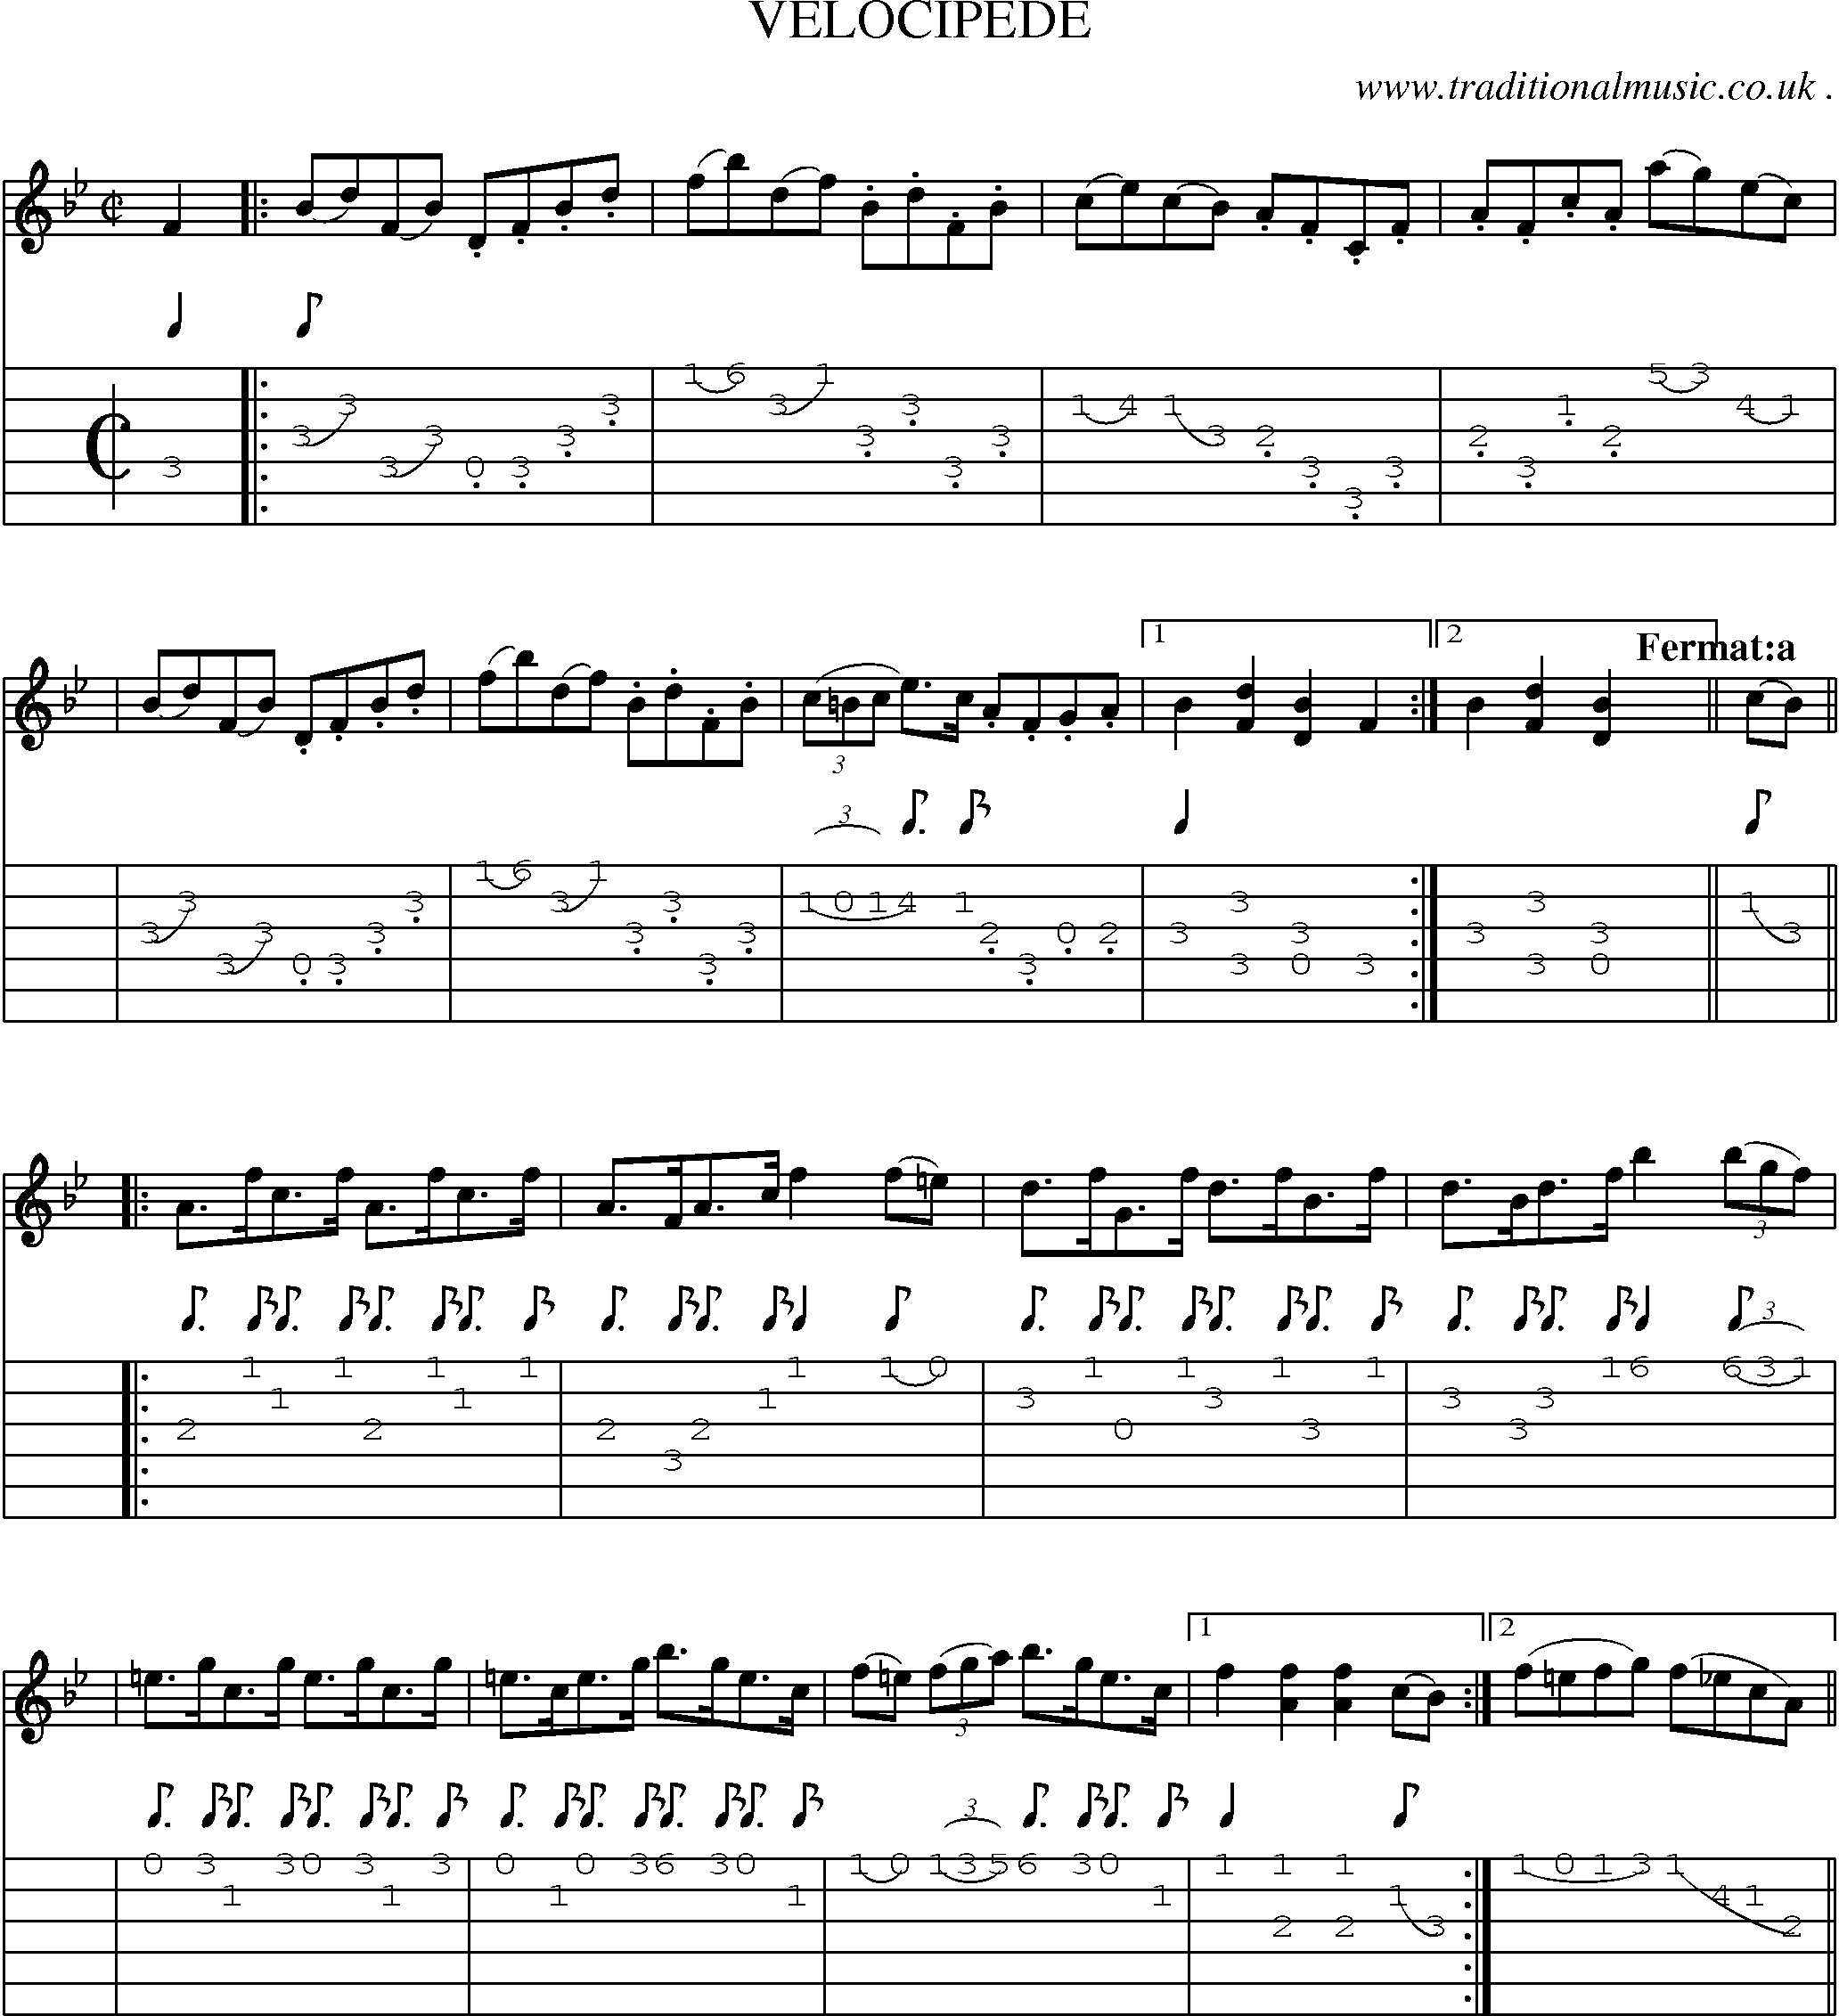 Sheet-Music and Guitar Tabs for Velocipede